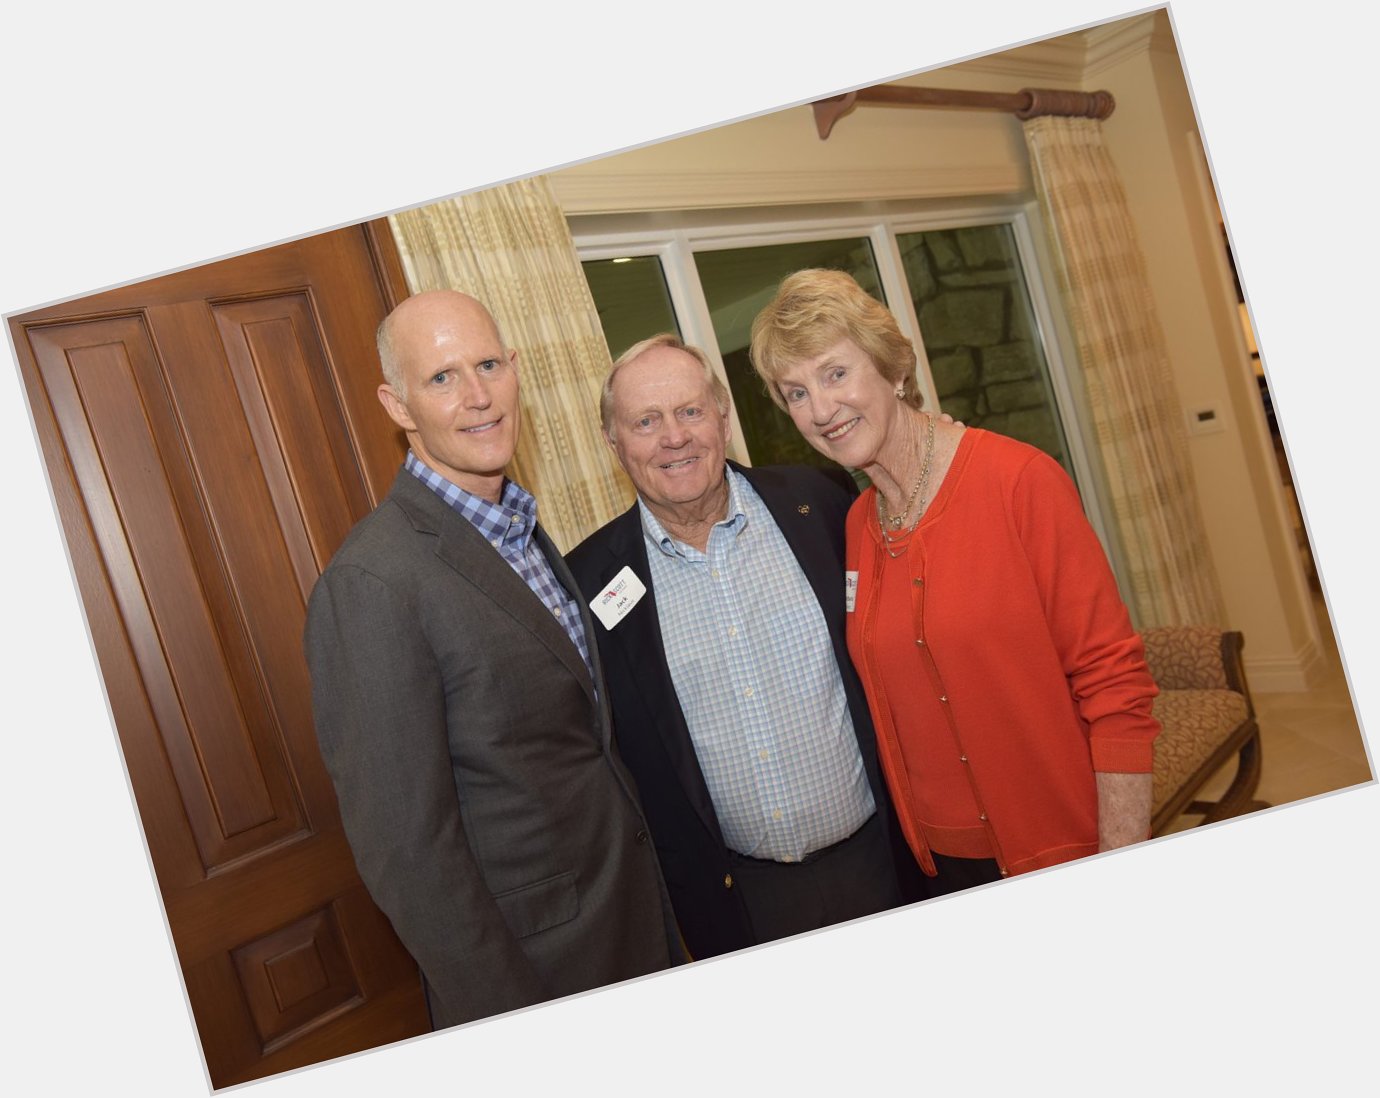 Happy birthday to my friend, and the Golden Bear, Jack Nicklaus! 